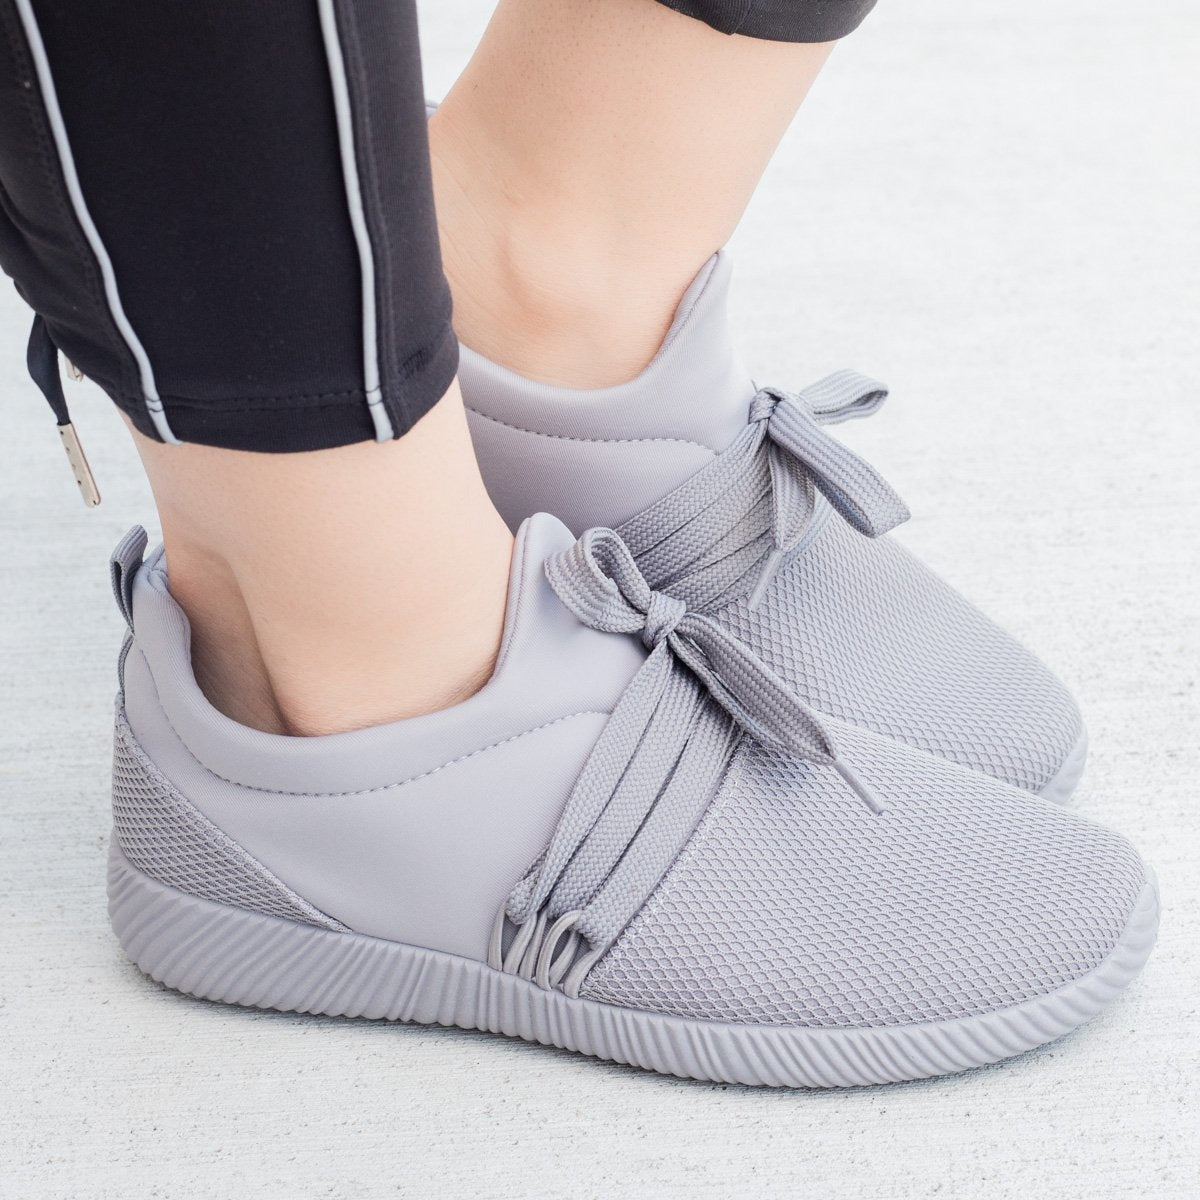 nacara lace up sneakers